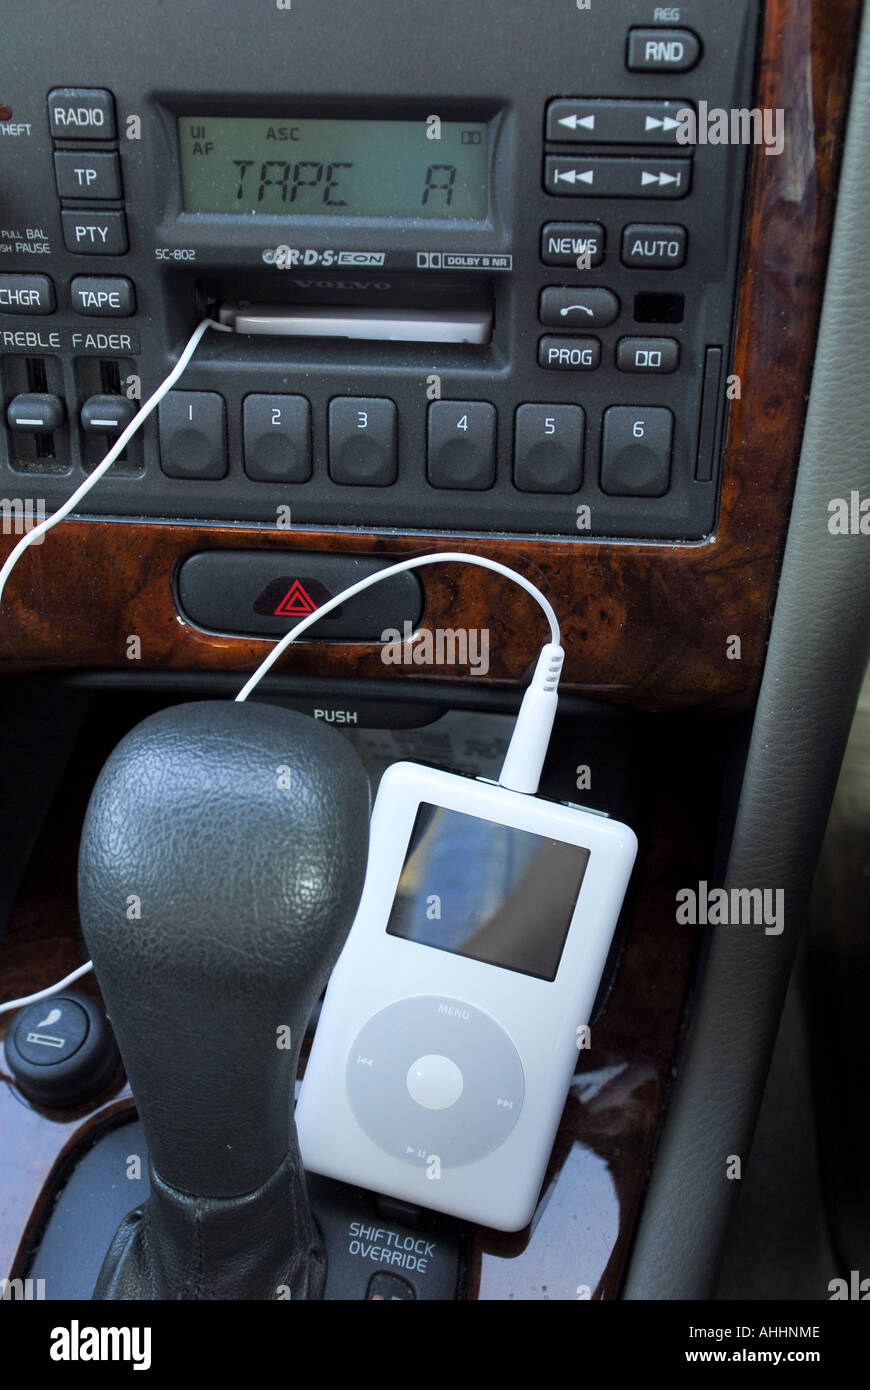 An Ipod connected to a cassette player adaptor for listening to music in  the car (don't leave ipods on show in your car Stock Photo - Alamy